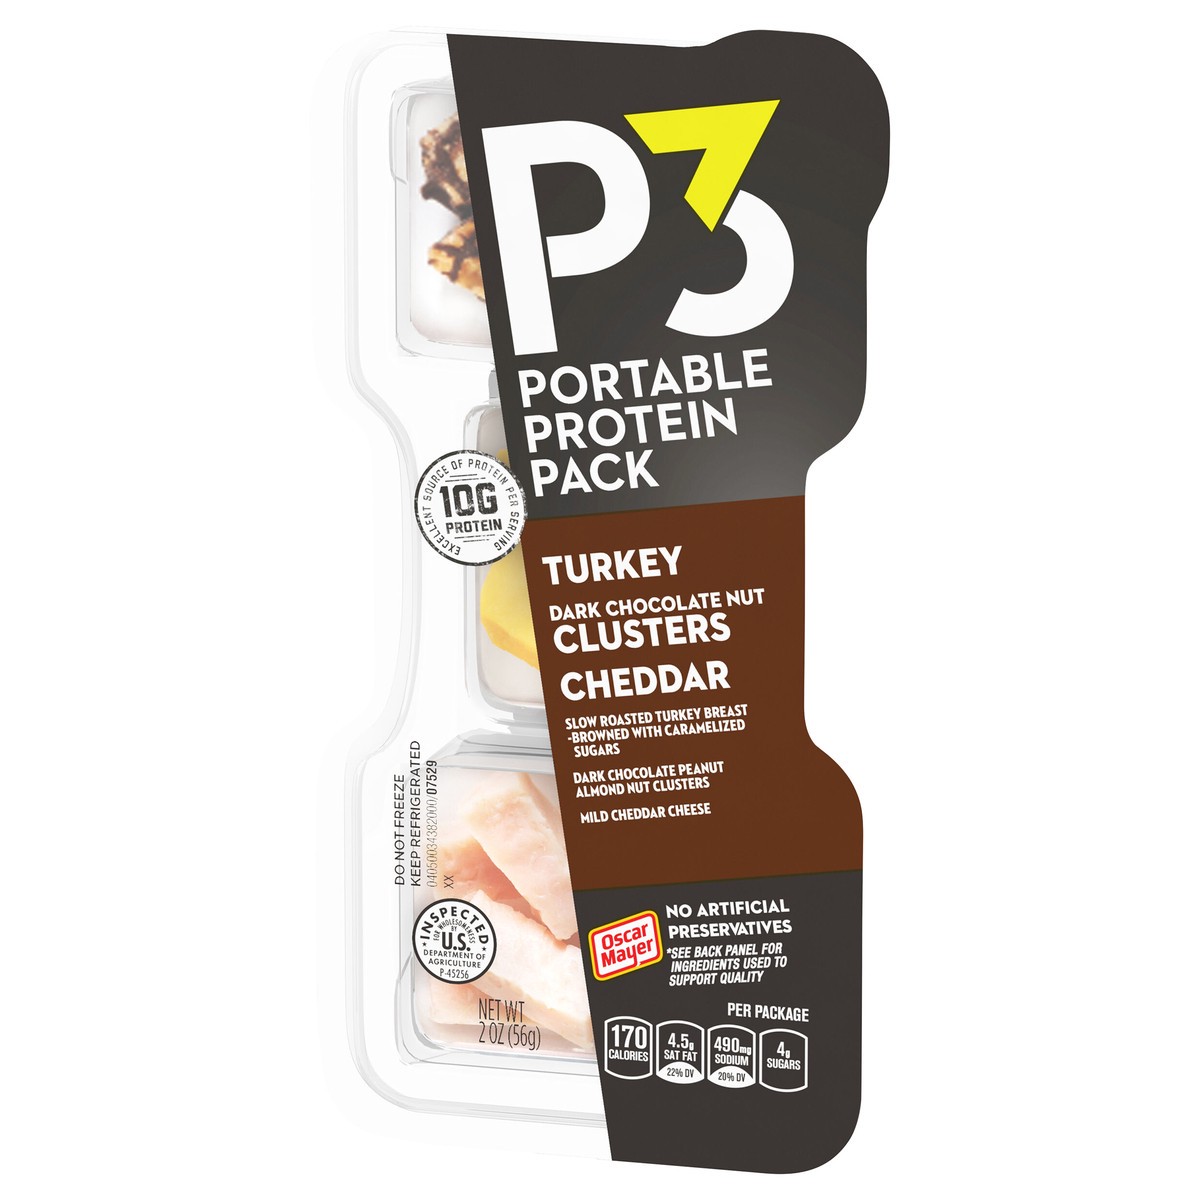 slide 6 of 9, P3 Portable Protein Snack Pack with Dark Chocolate Almond Nut Clusters, Turkey & Cheddar Cheese, 2 oz Tray, 2 oz